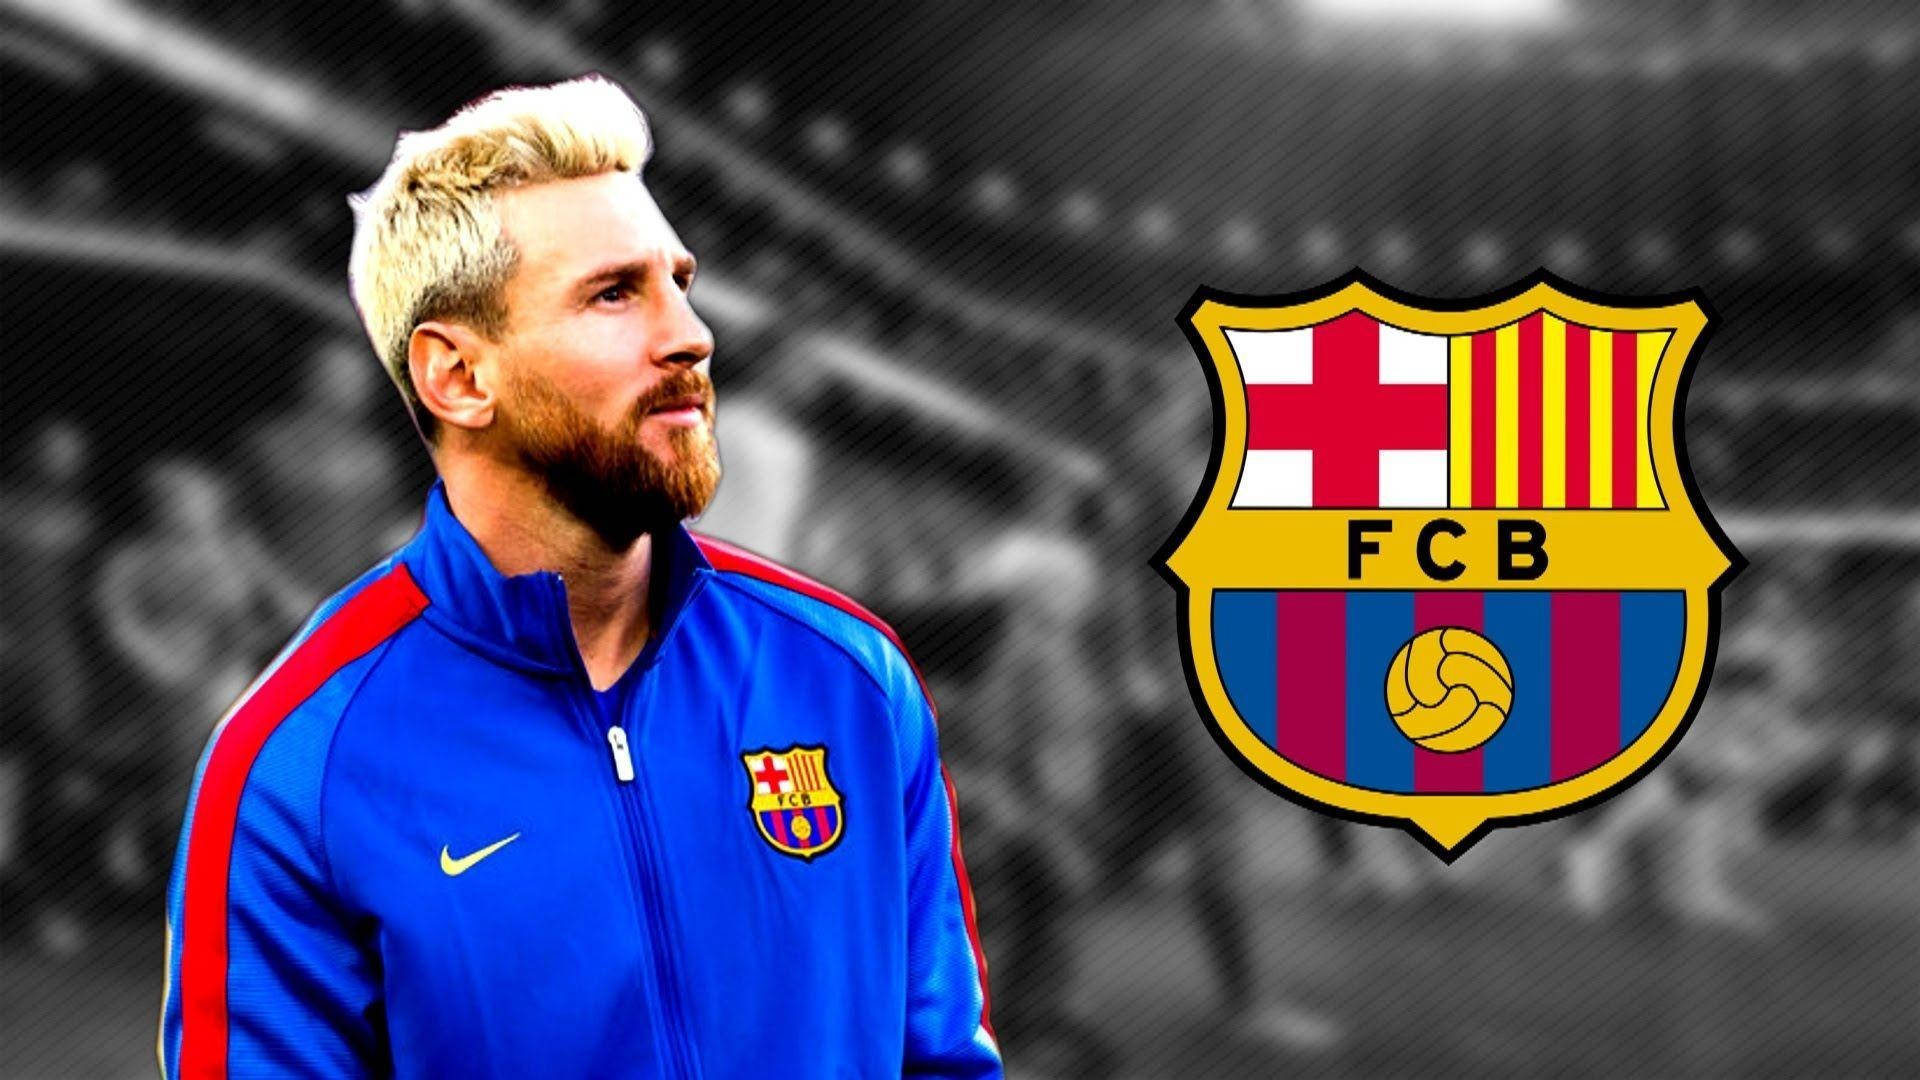 Messi With Fcb Logo